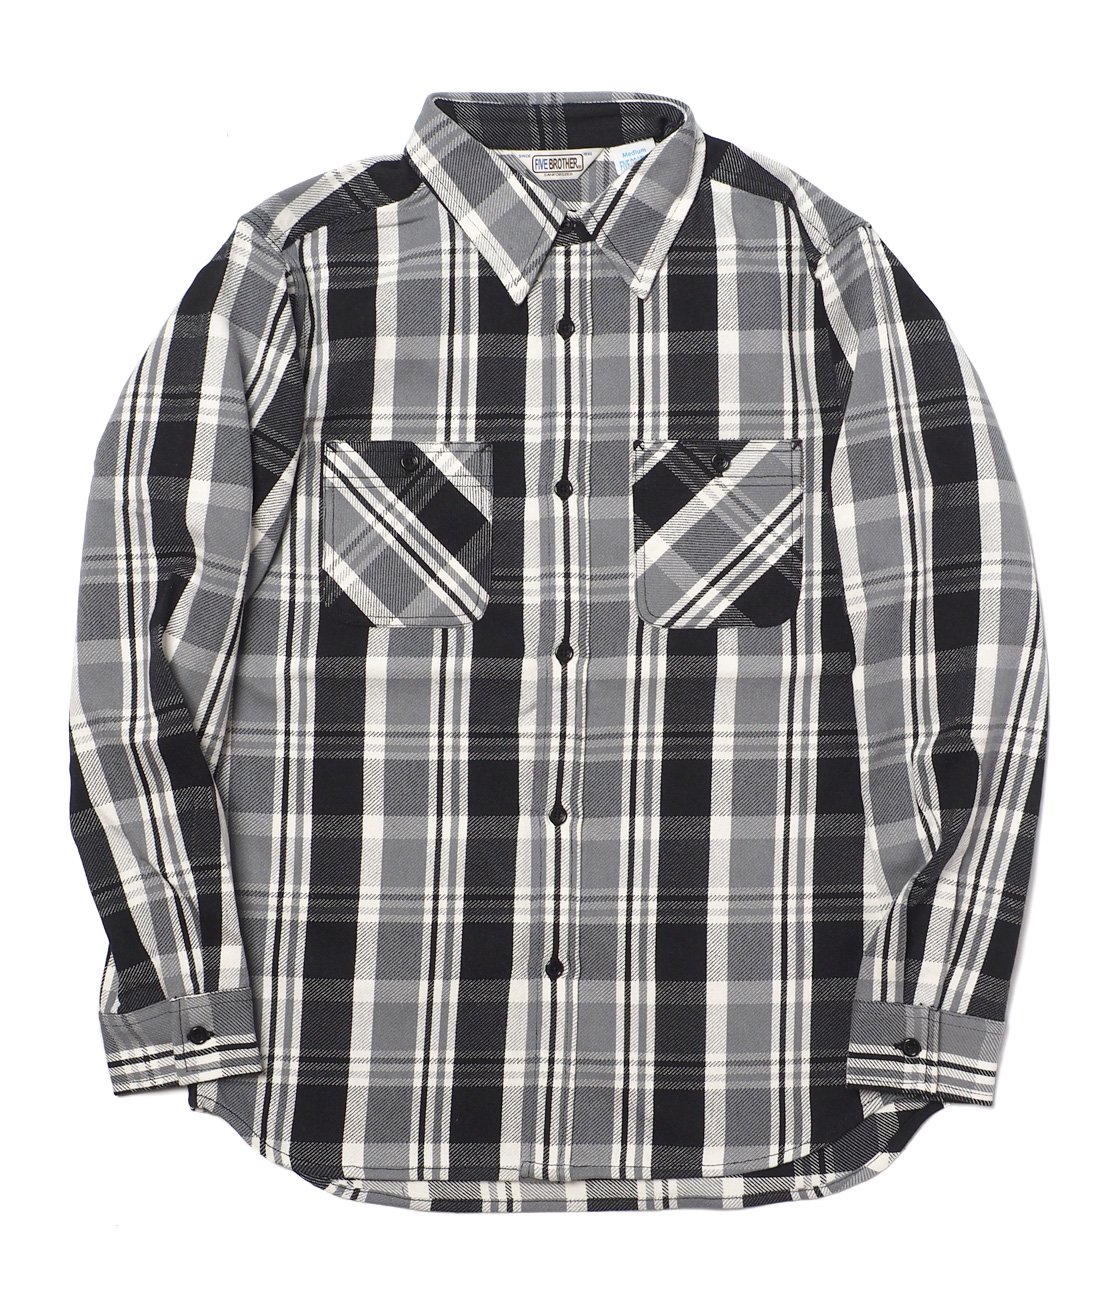 FIVE BROTHER】HEAVY FLANNEL WORK SHIRT - BLACK CHECK ネルシャツ ...